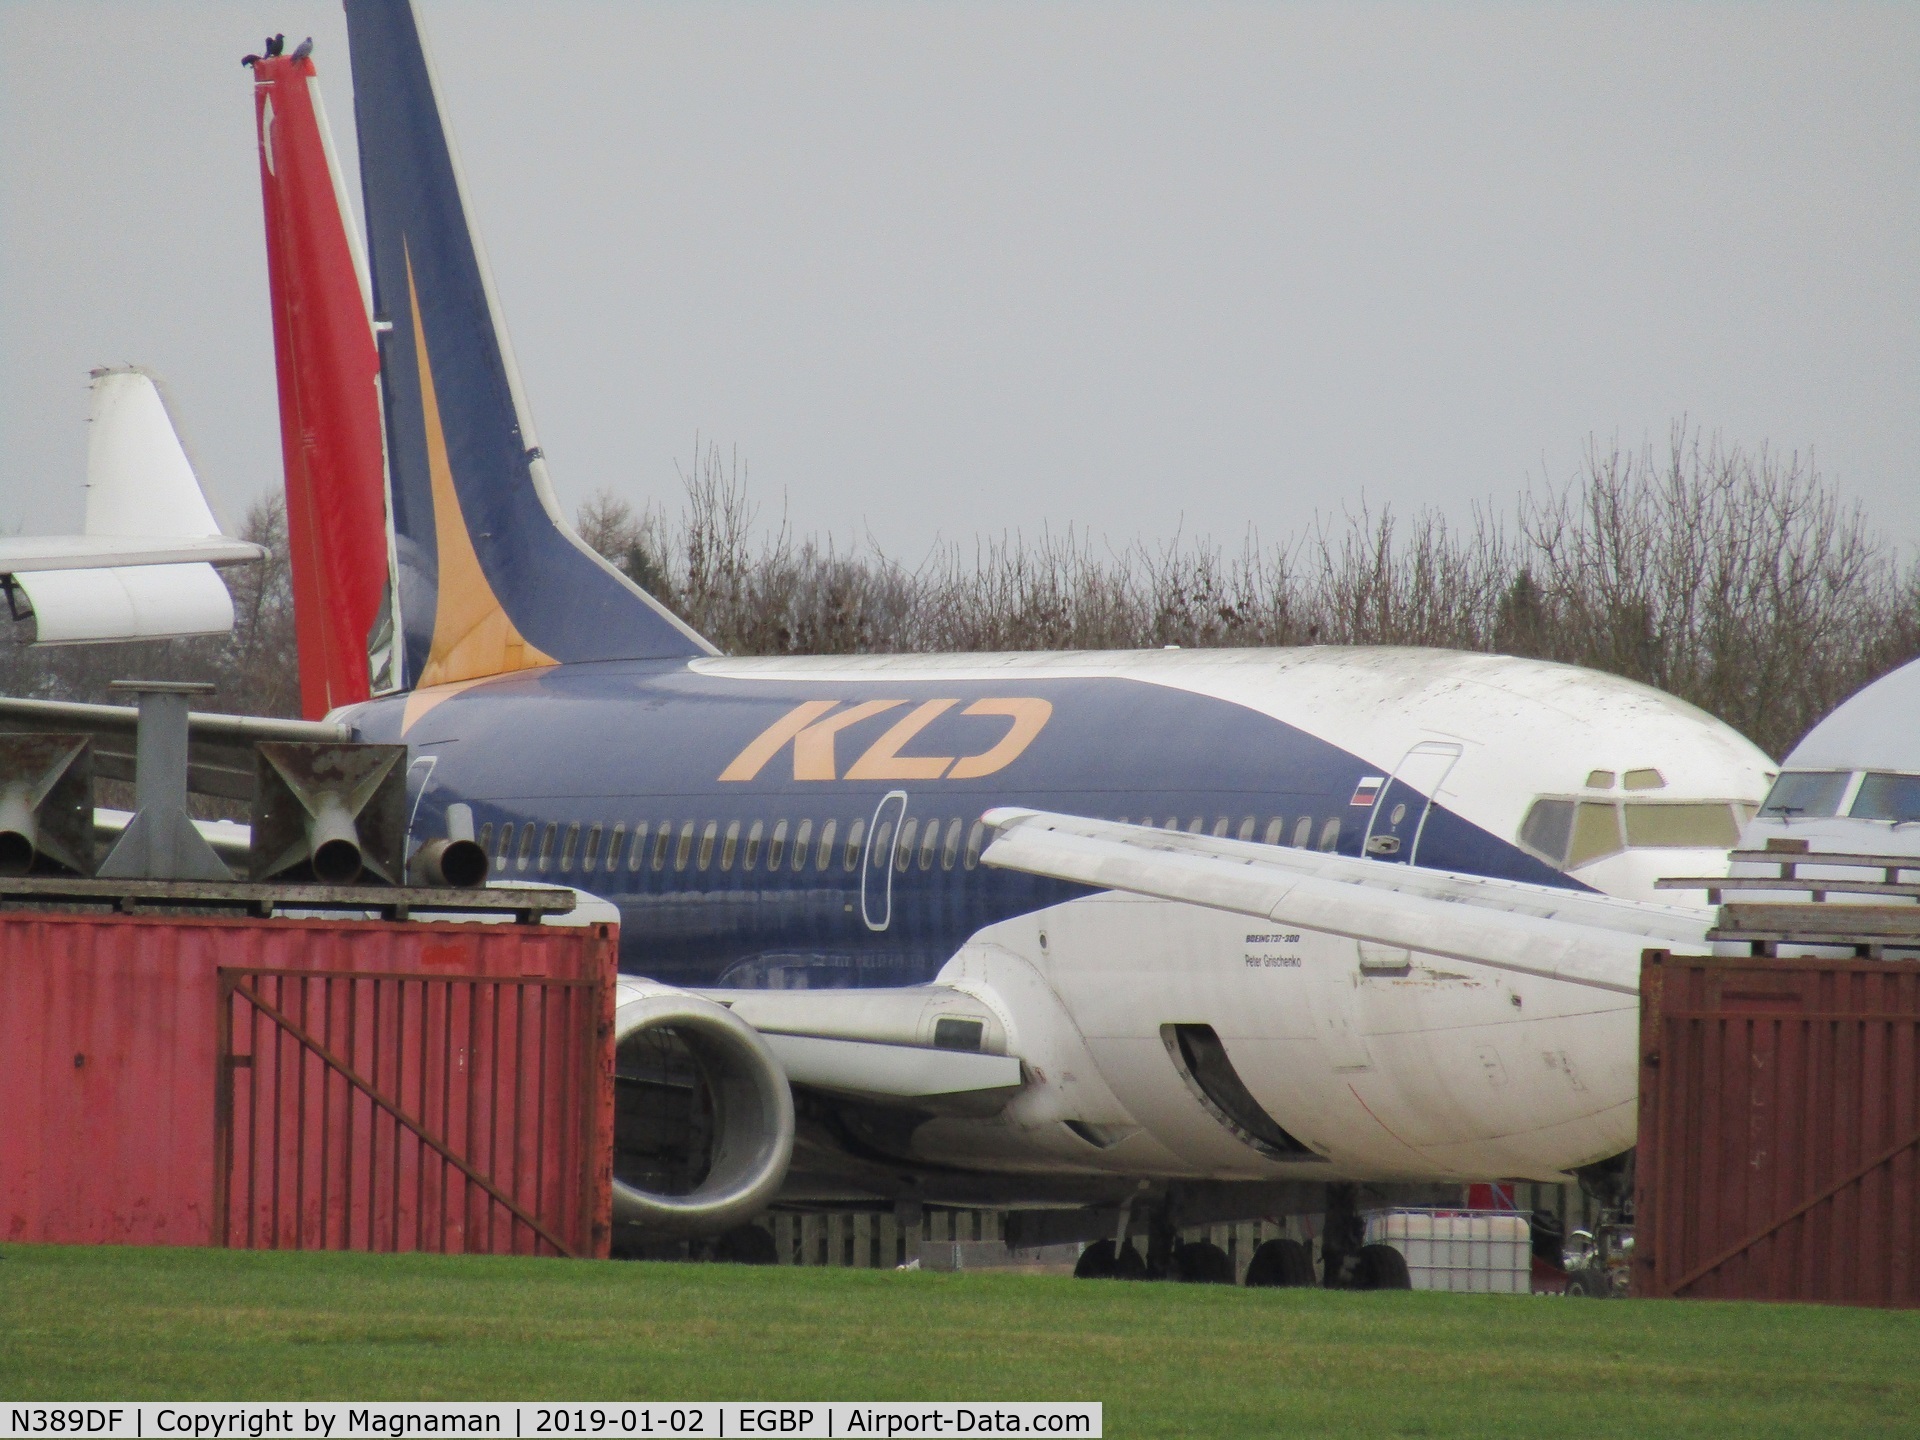 N389DF, 2005 Boeing 737-3M8 C/N 25017, at Kemble along with two other ex russian airliners for their fate